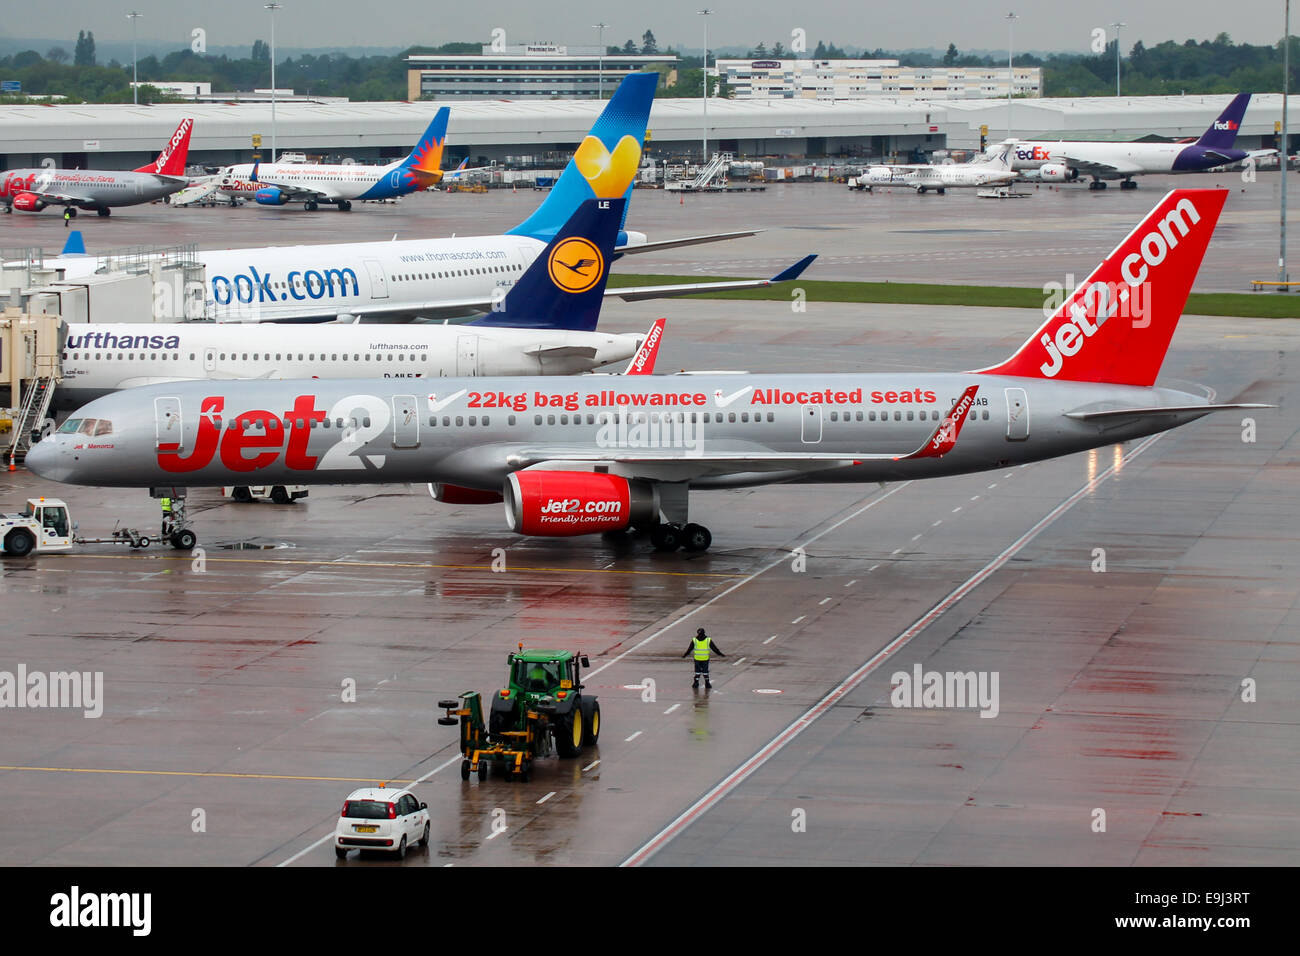 Jet2 Boeing 757-200 pushes back from terminal 1 at Manchester airport. Stock Photo